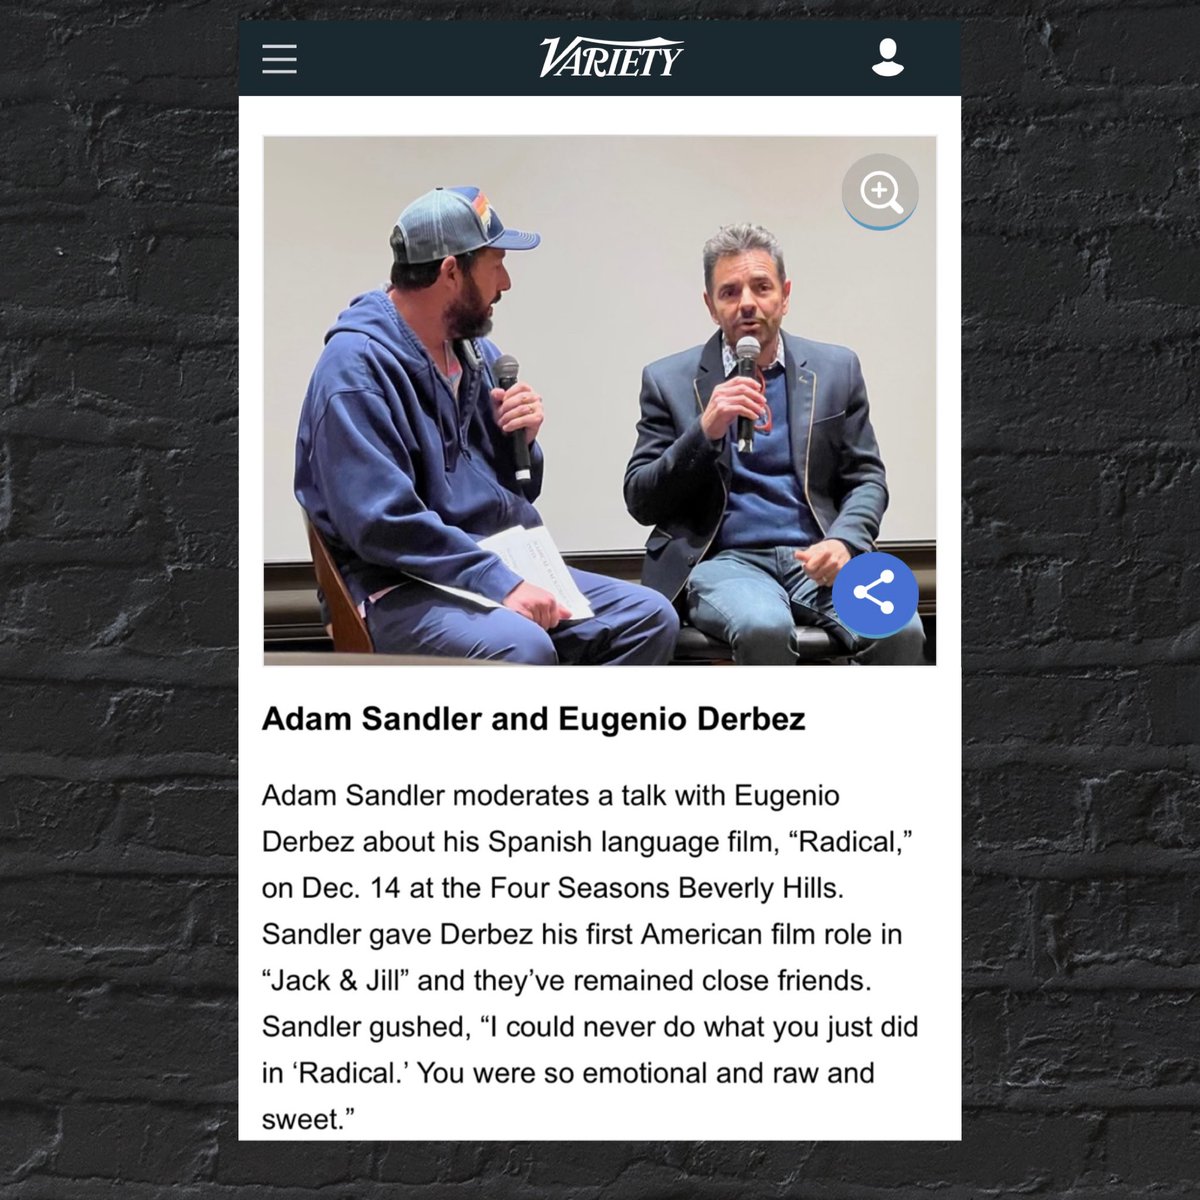 “This movie goes beyond making a movie…it did so much for so many people.” - Adam Sandler @EugenioDerbez sat down with @AdamSandler following a screening of #RadicalTheMovie to talk about making the film, the Radical Fund, and more. 🔗 : variety.com/gallery/celebr…